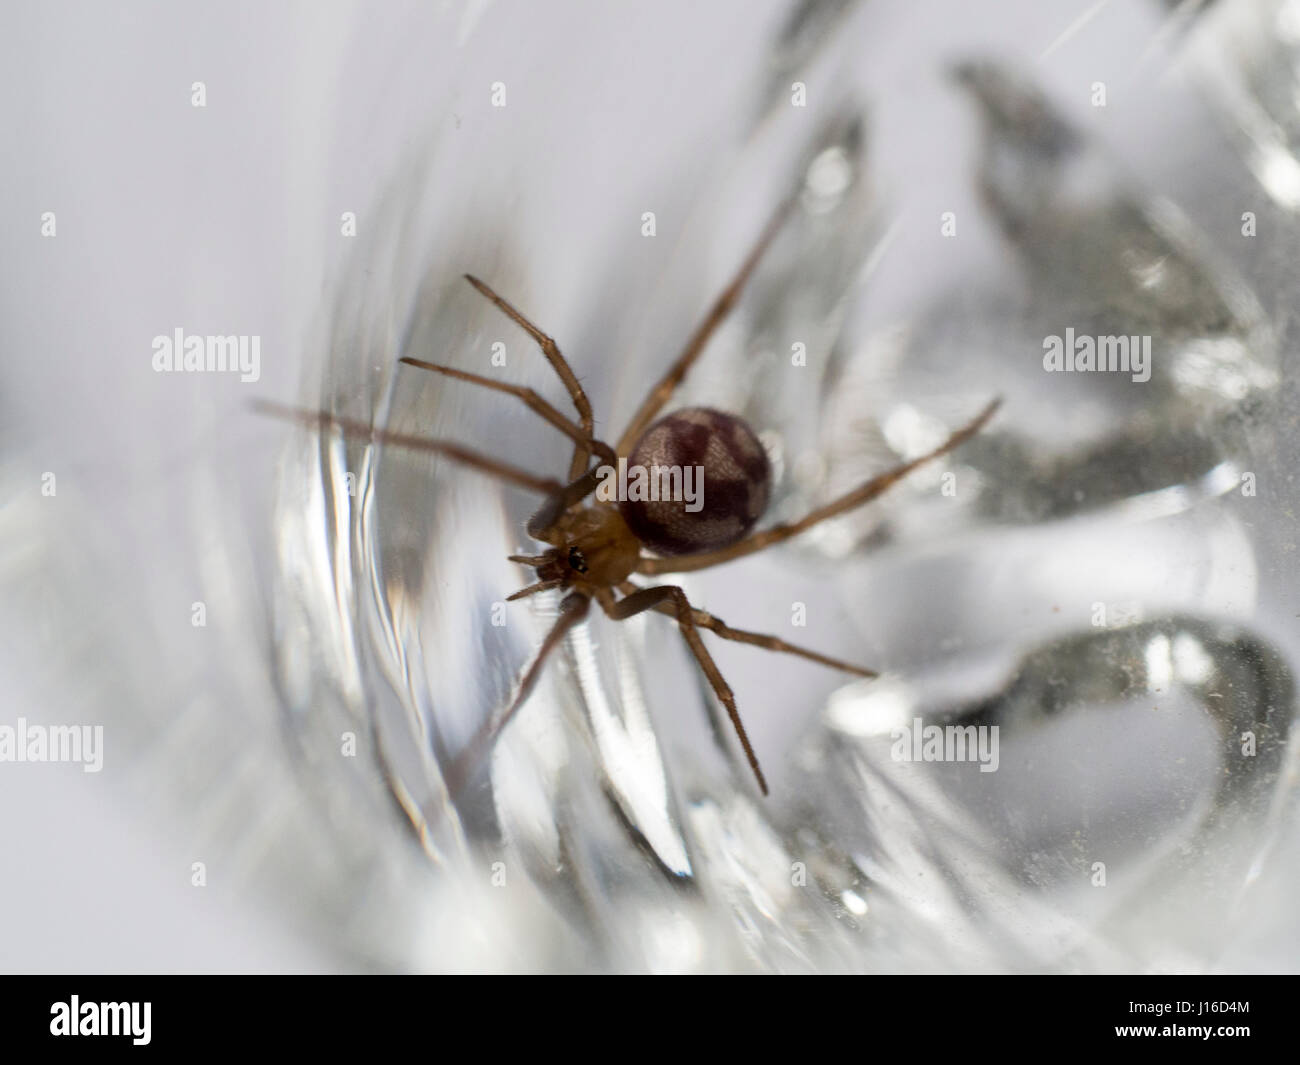 Female Noble False widow spider, steatoda nobilis, caught in a patterned glass. Stock Photo